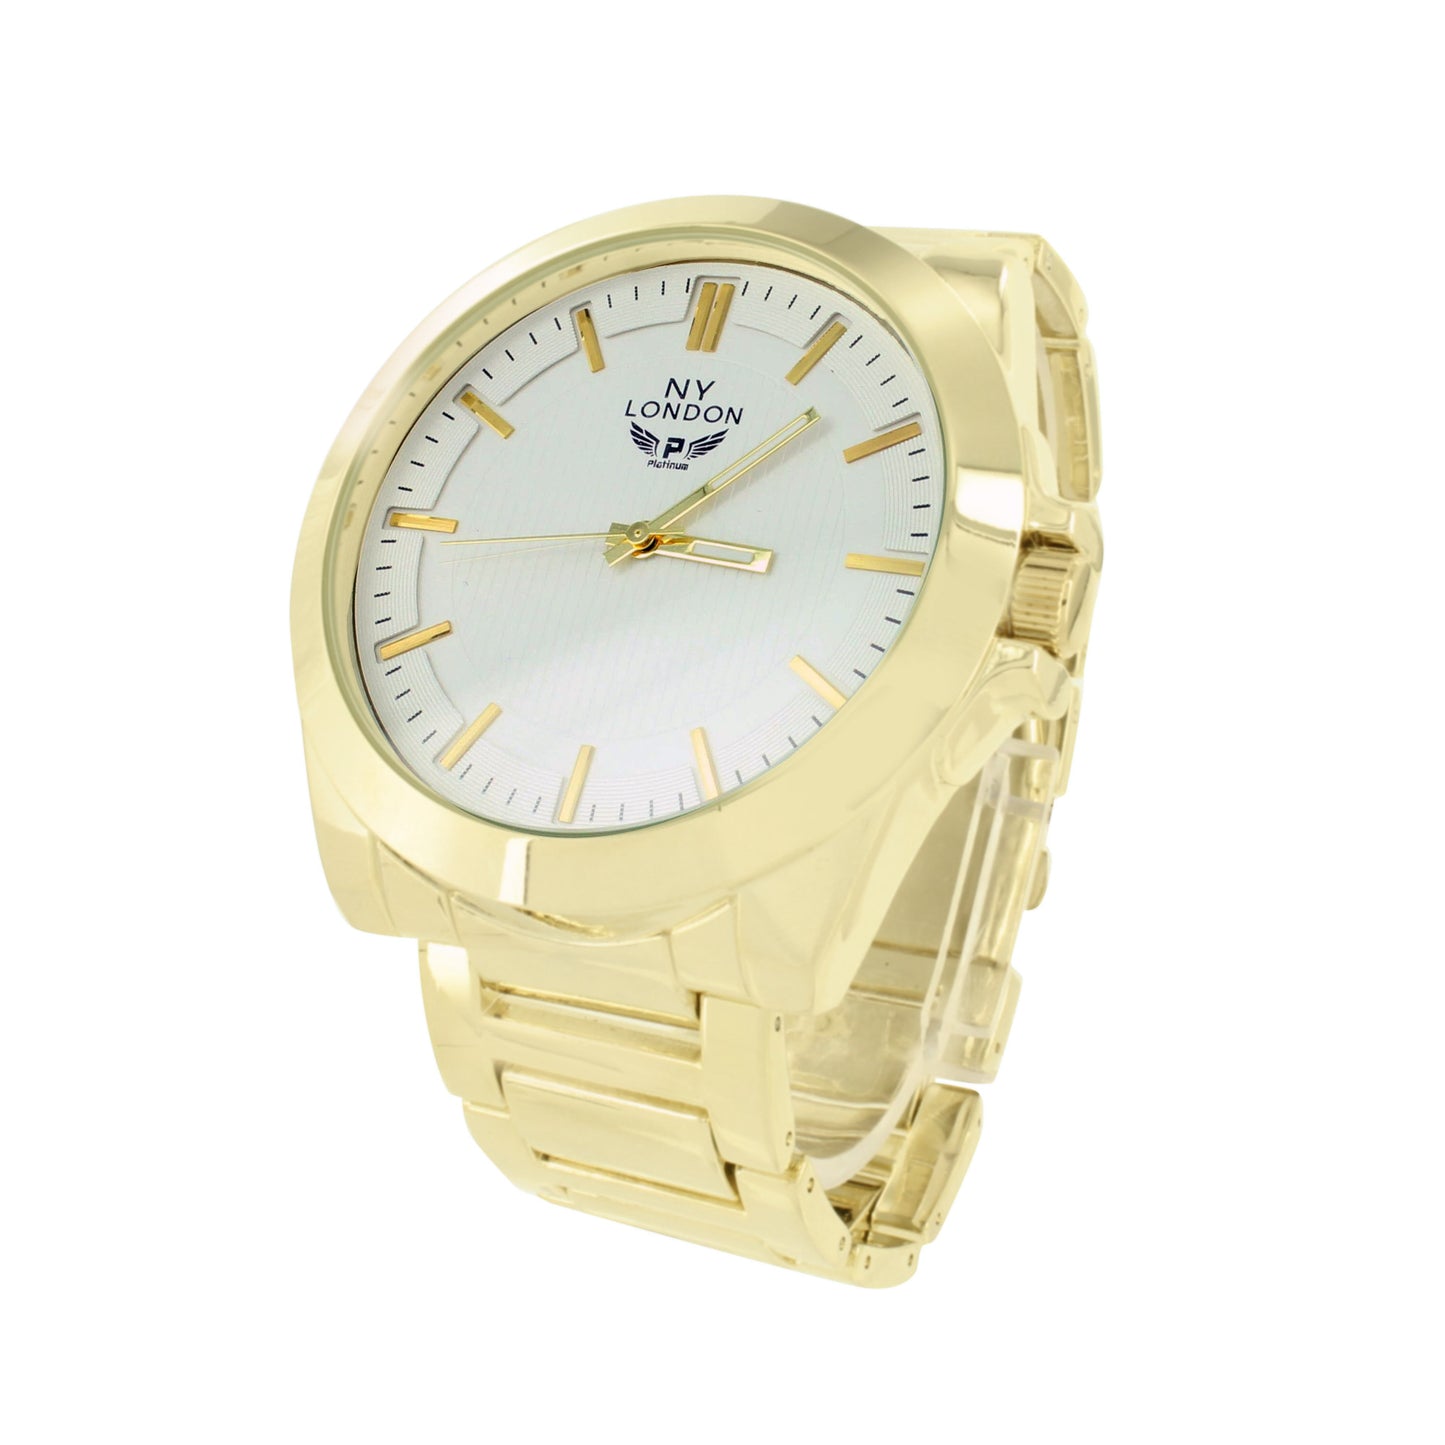 New Gold Tone Mens Watch White Dial Round Face Analog NY London